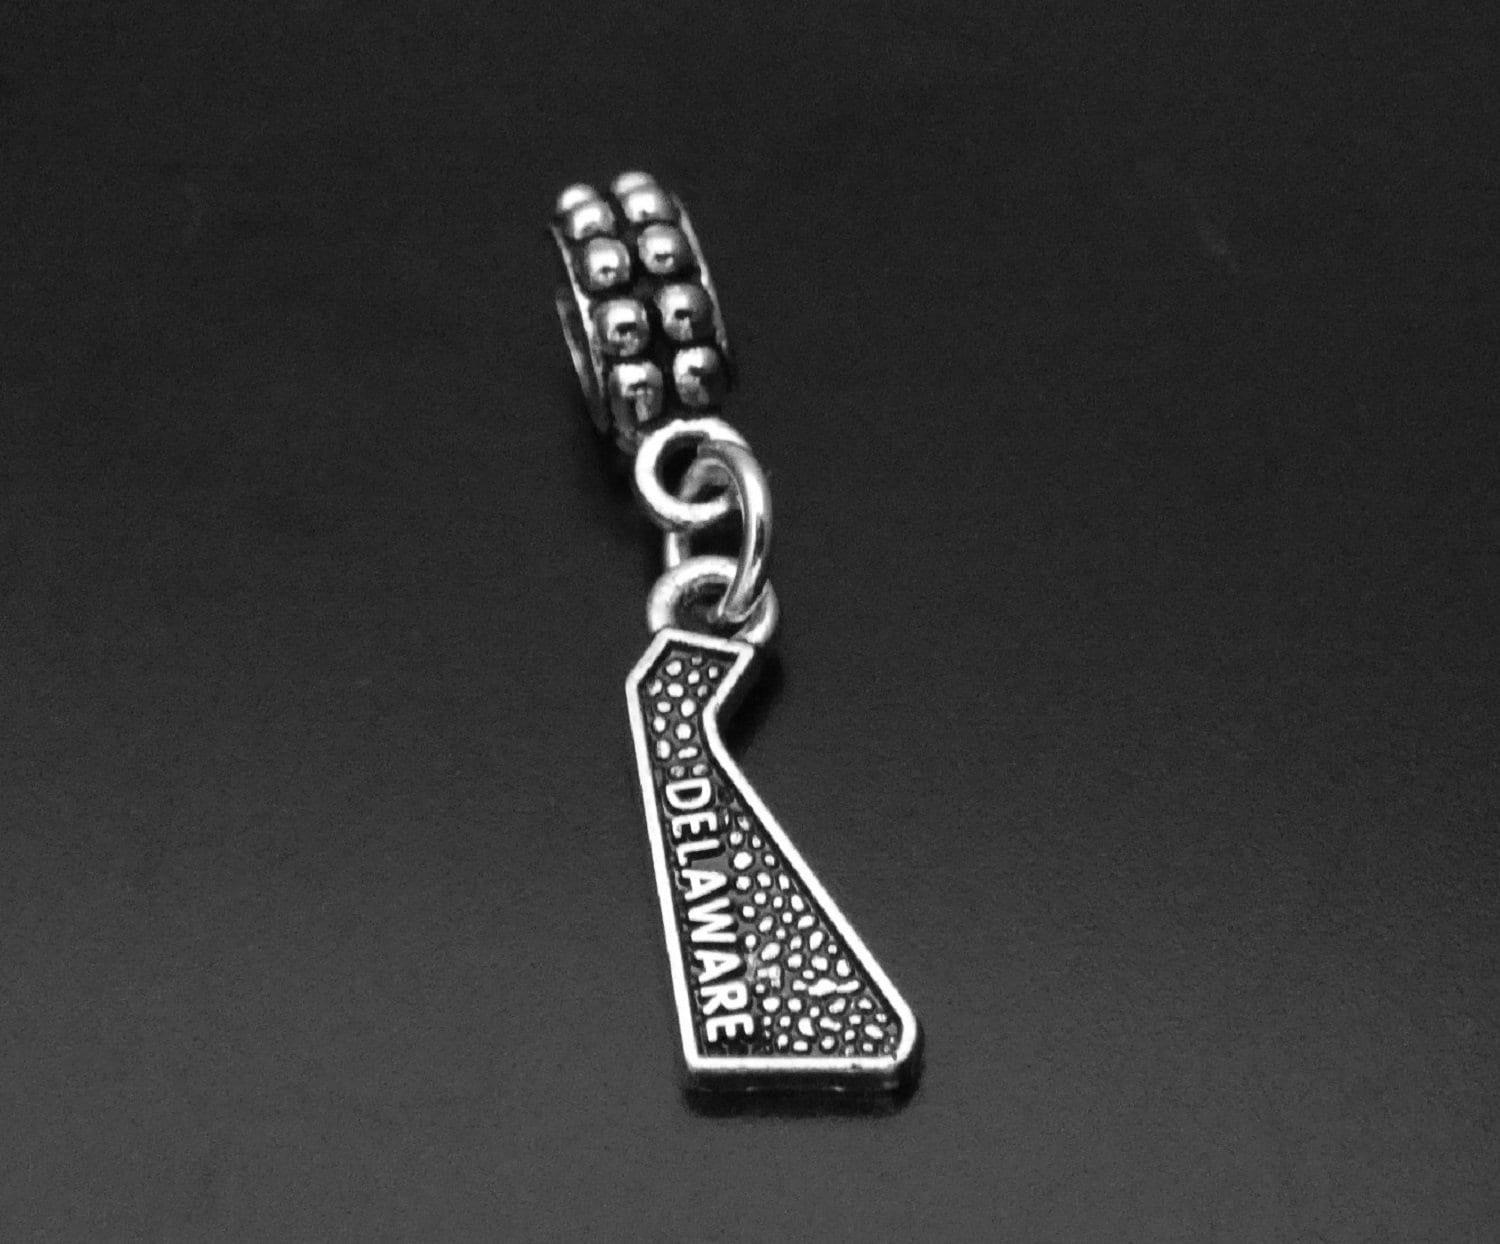 Sterling Silver State of Delaware Charm Fits Traditional and European Charm Bracelets...0842